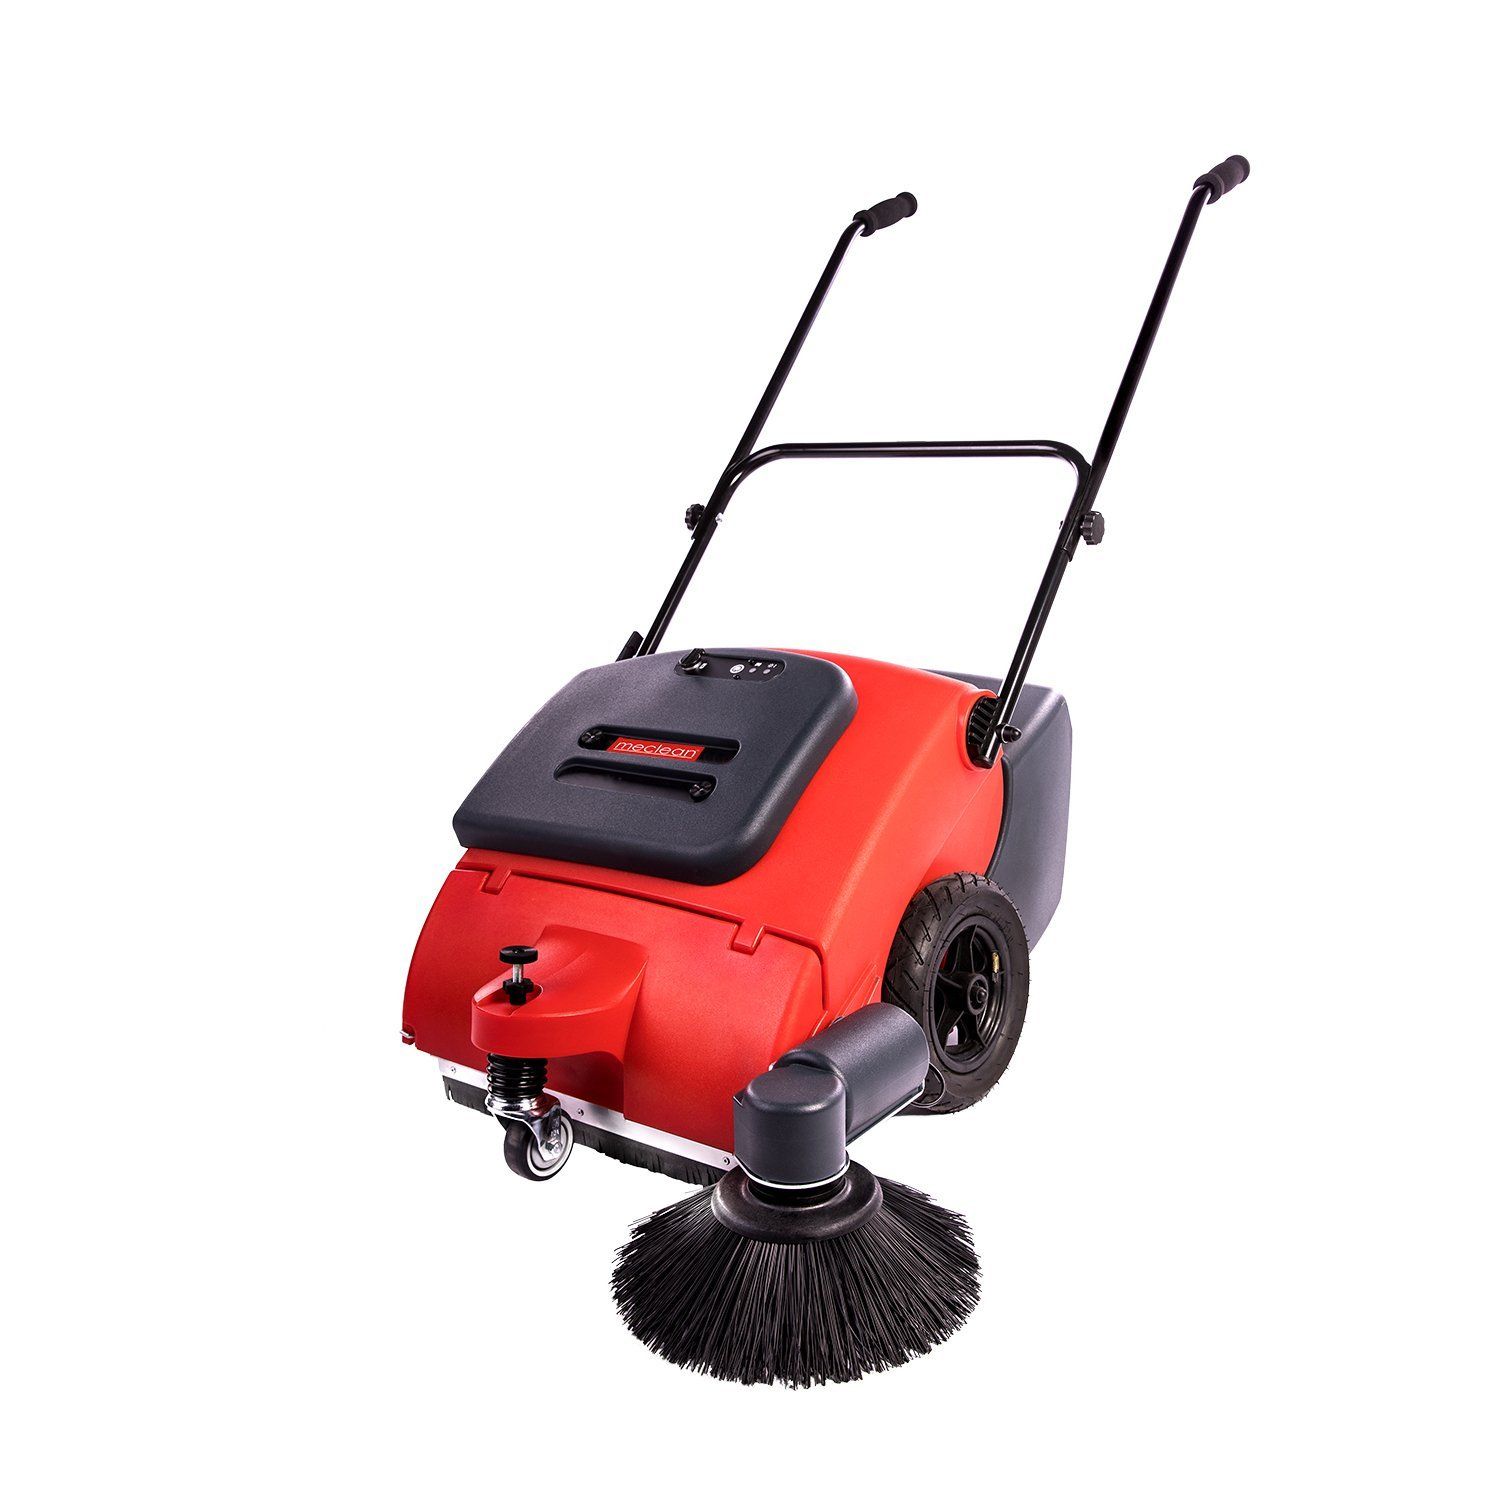 Meclean professional outdoor sweeper manual powered drive CROSSWEEP 650